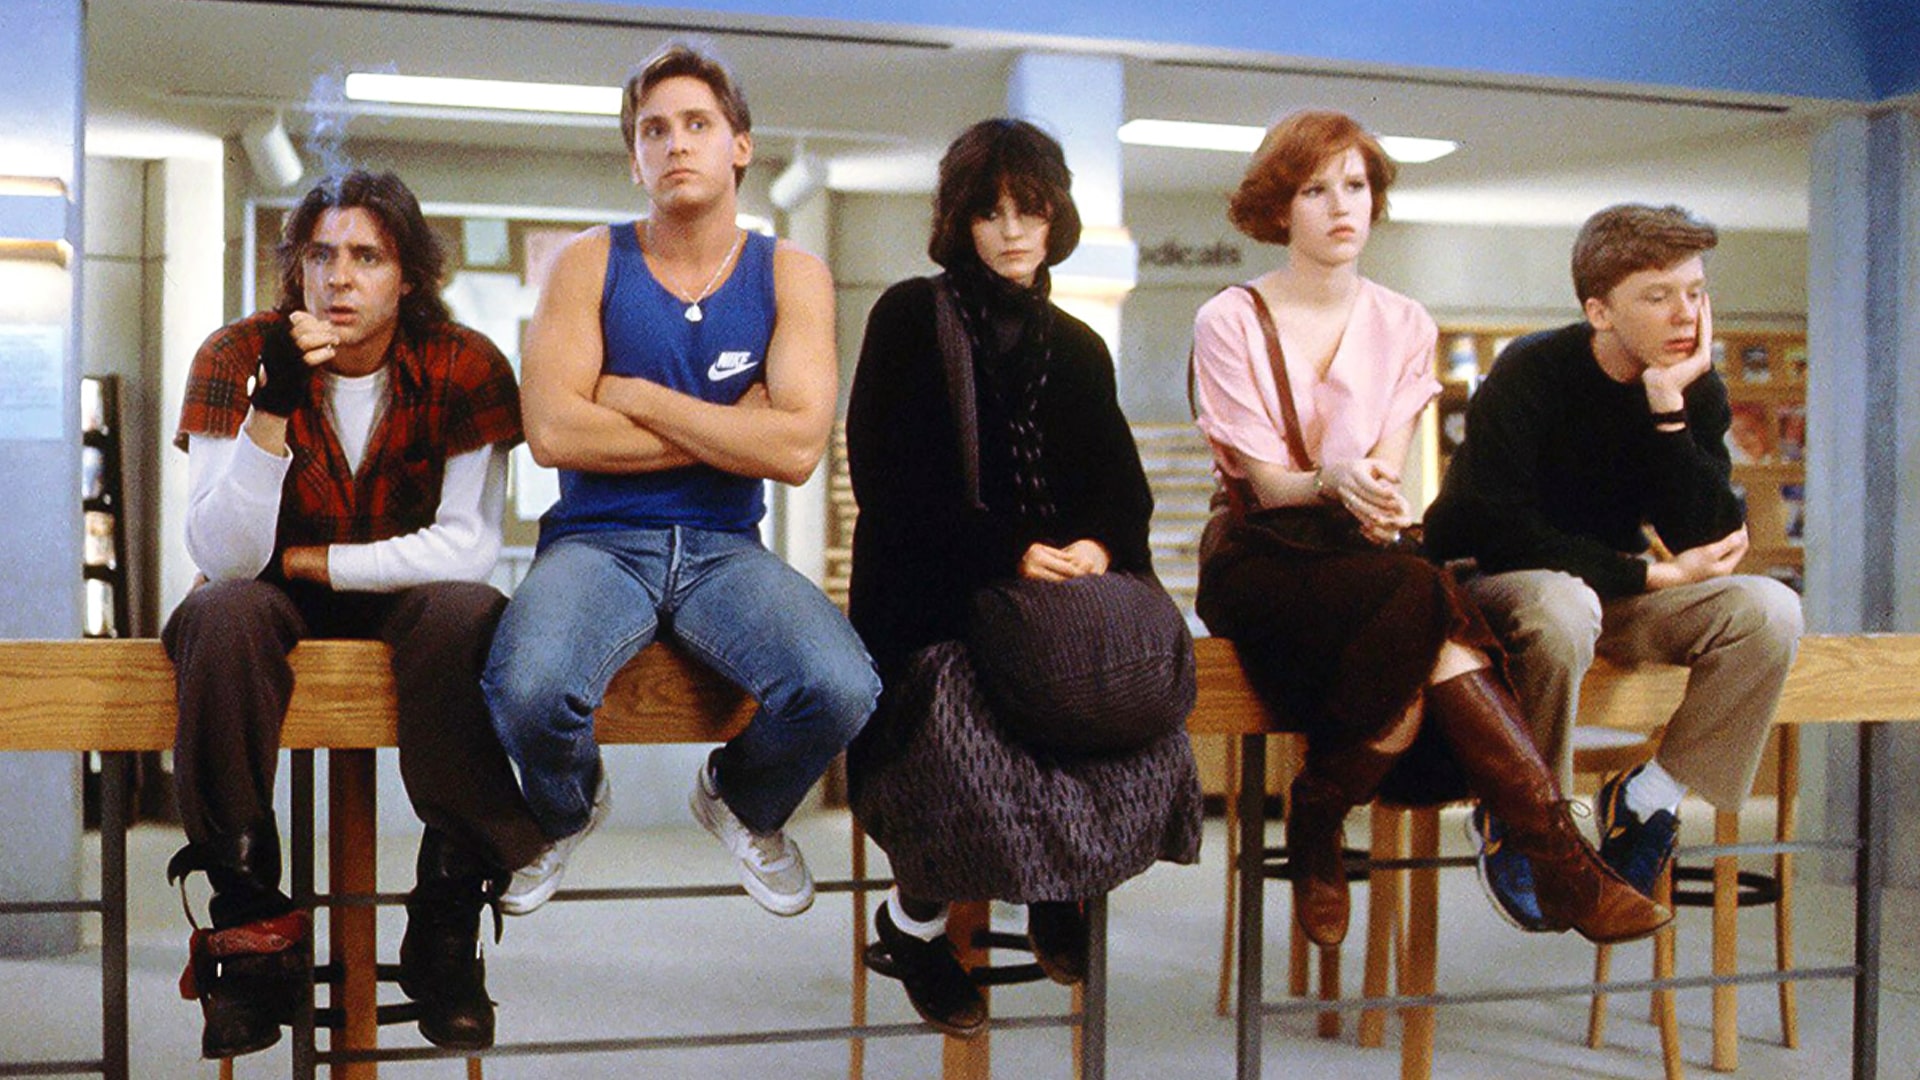 The Breakfast Club Movie - 61 The Breakfast Club (1985) Movie Facts You Haven't Read Before